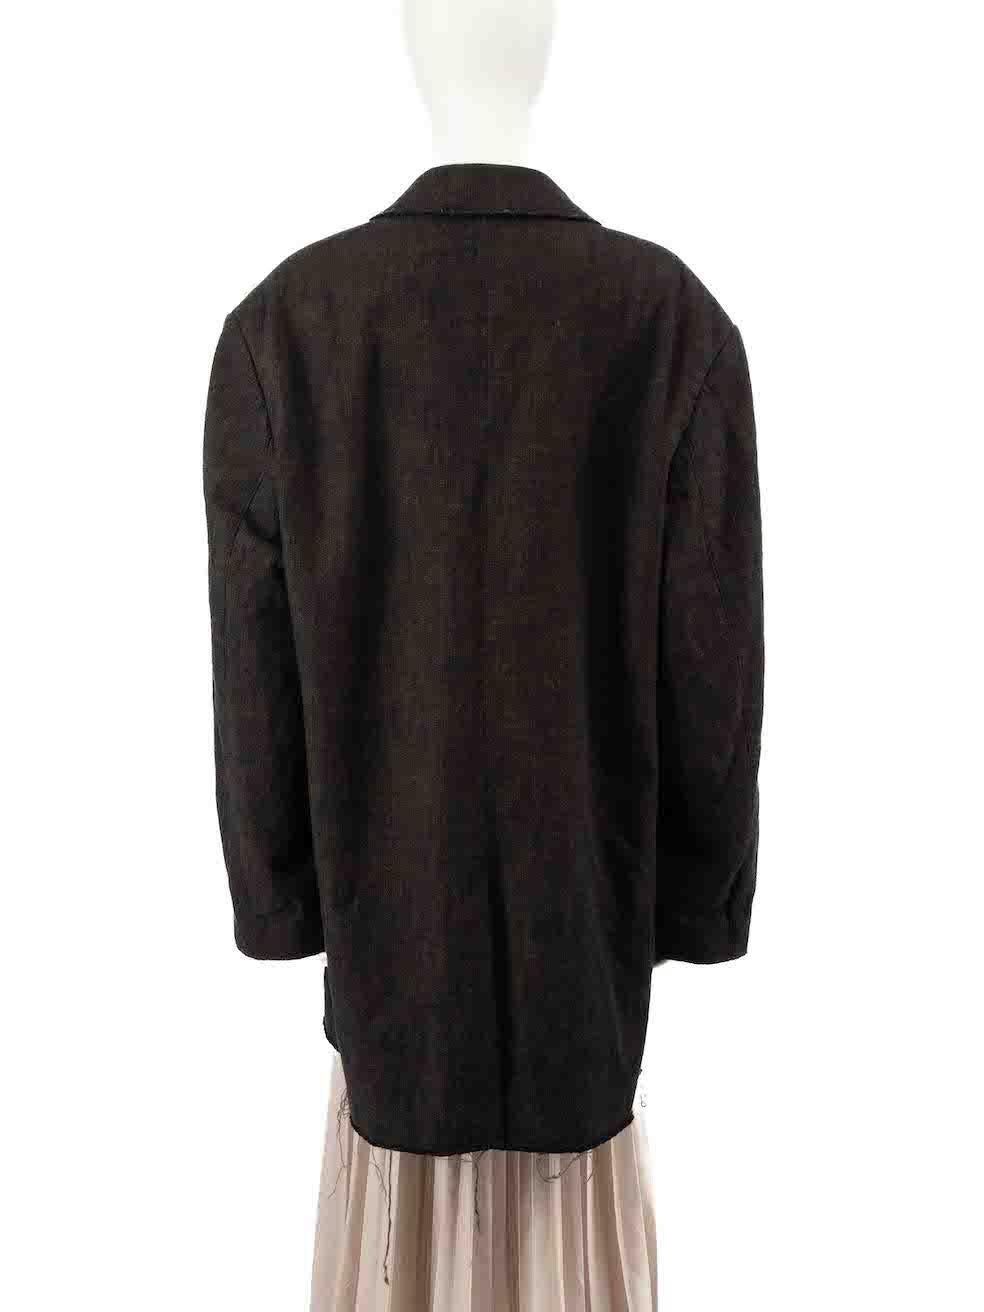 Acne Studios Black Oversized Fit Blazer Size M In Good Condition For Sale In London, GB